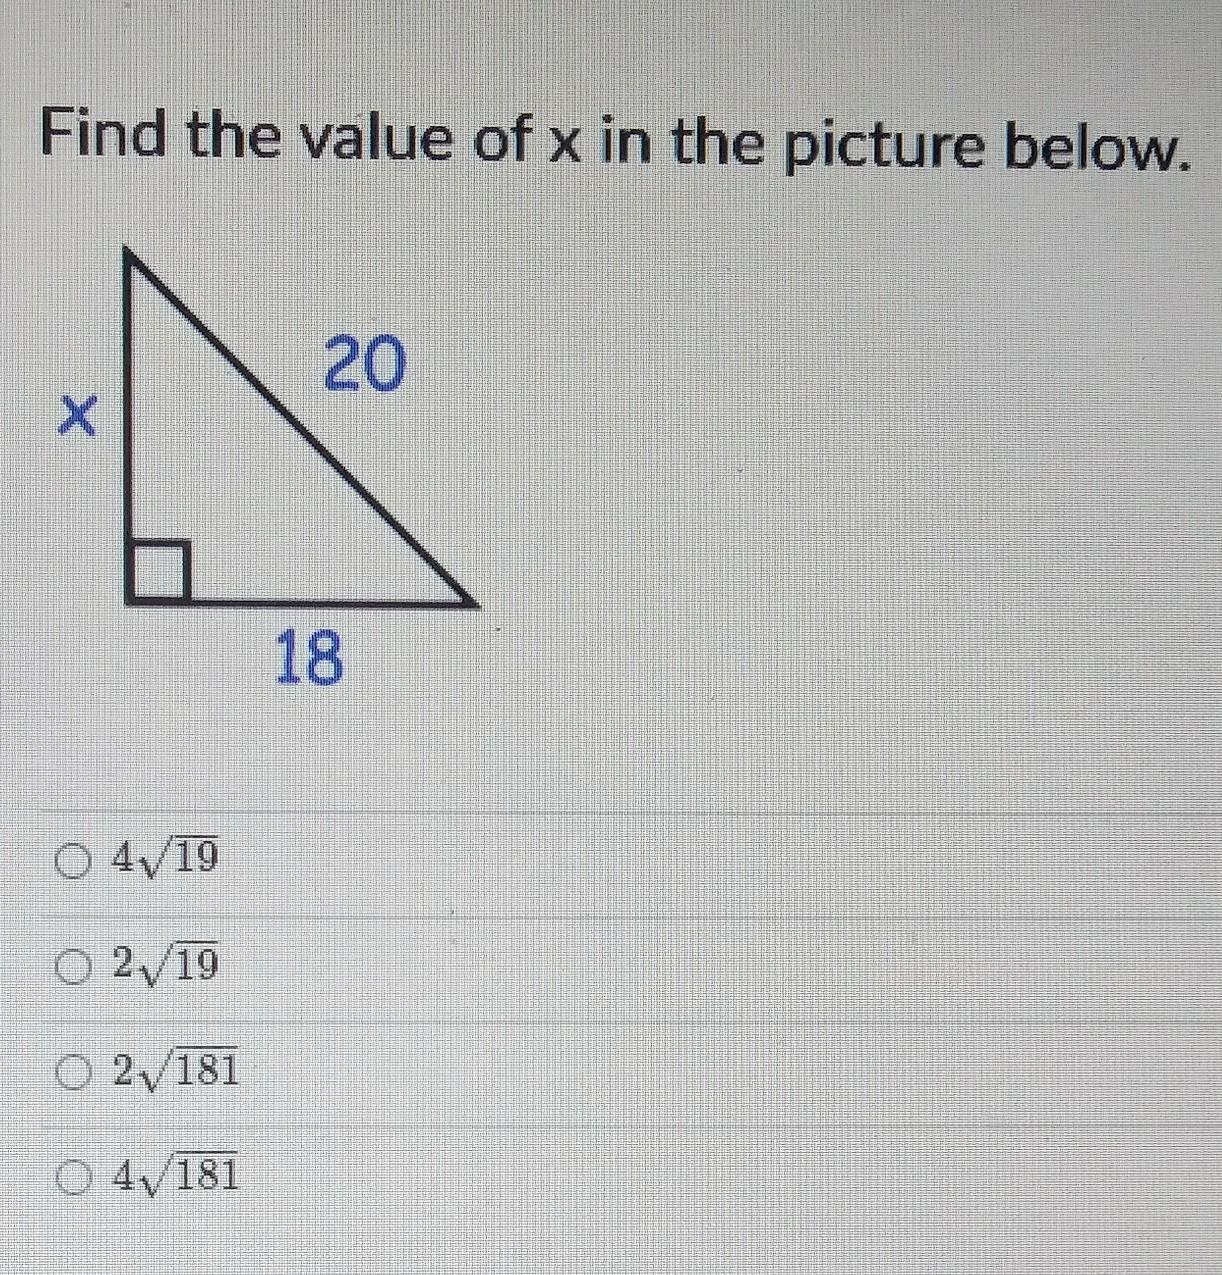 Find The Value Of X In The Picture Below Using The Provided 4 Answer Choices.